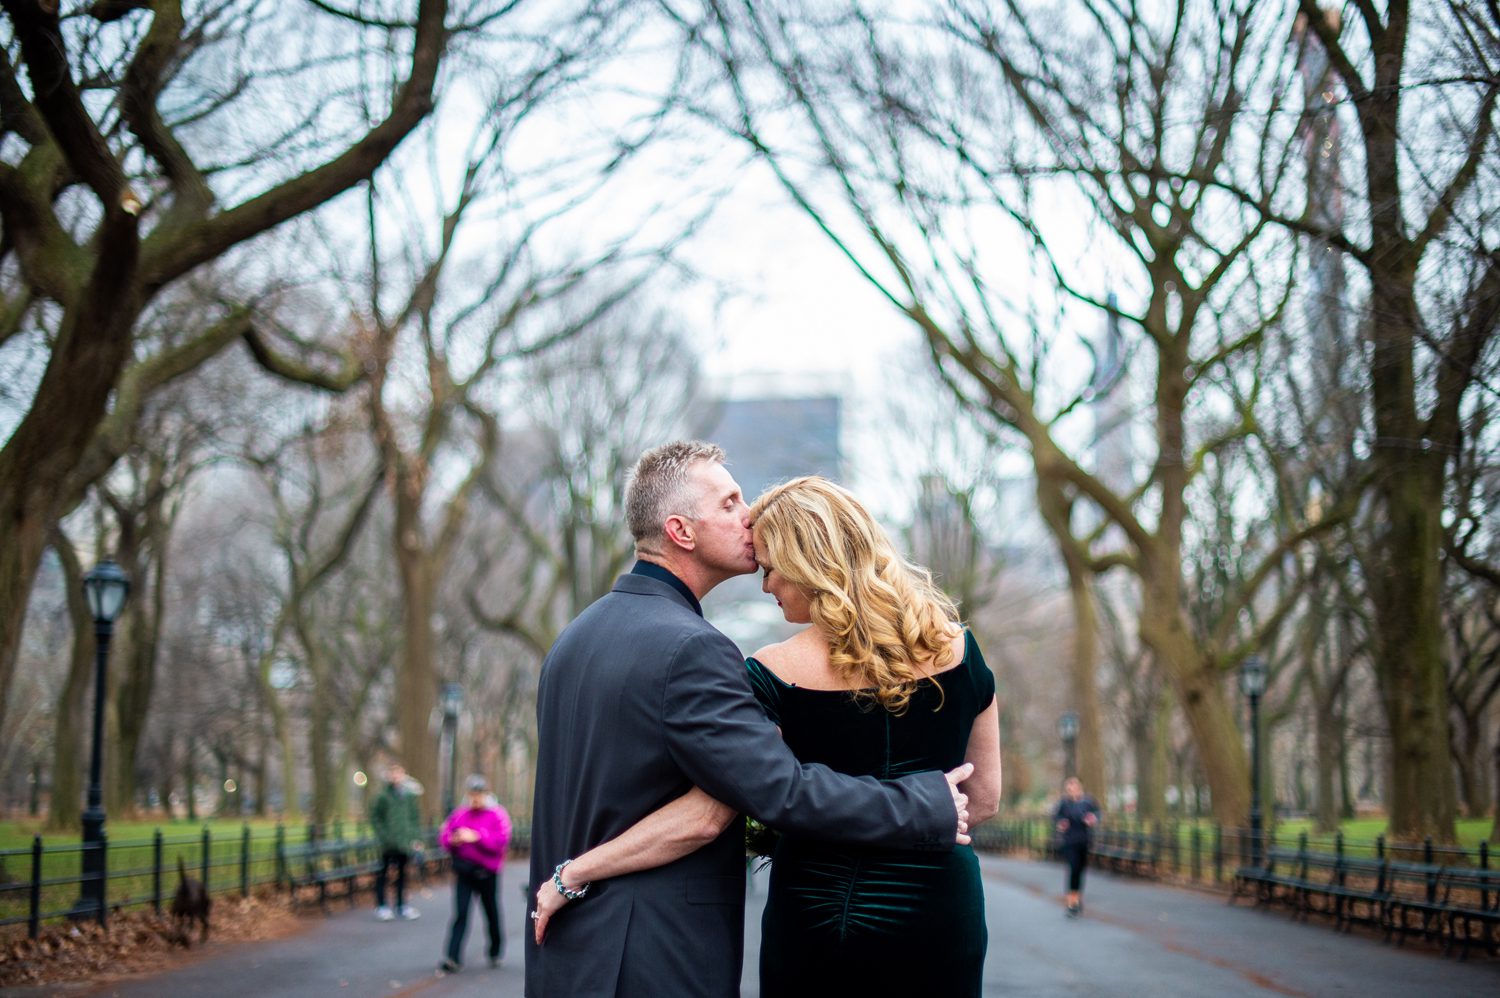 How To Elope in NYC